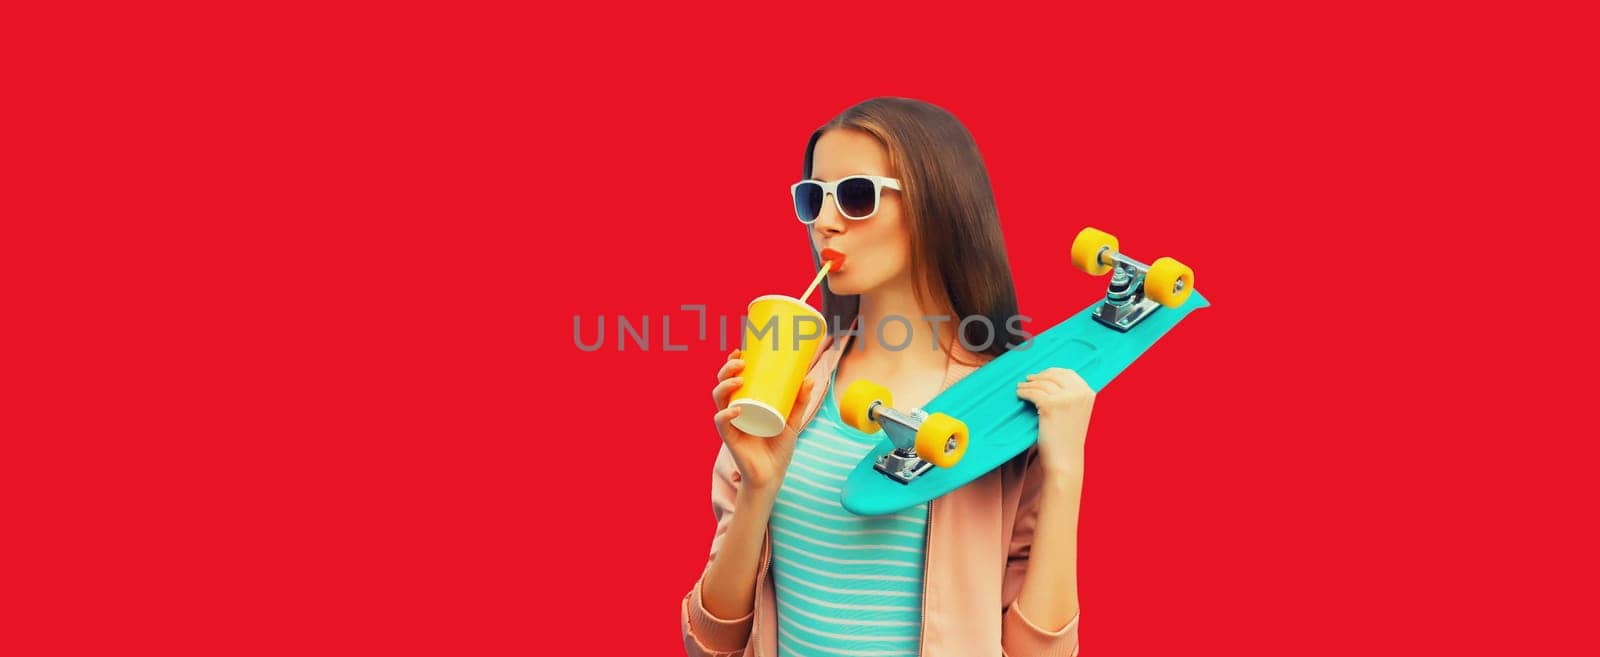 Portrait of stylish young woman with skateboard drinking juice on red background